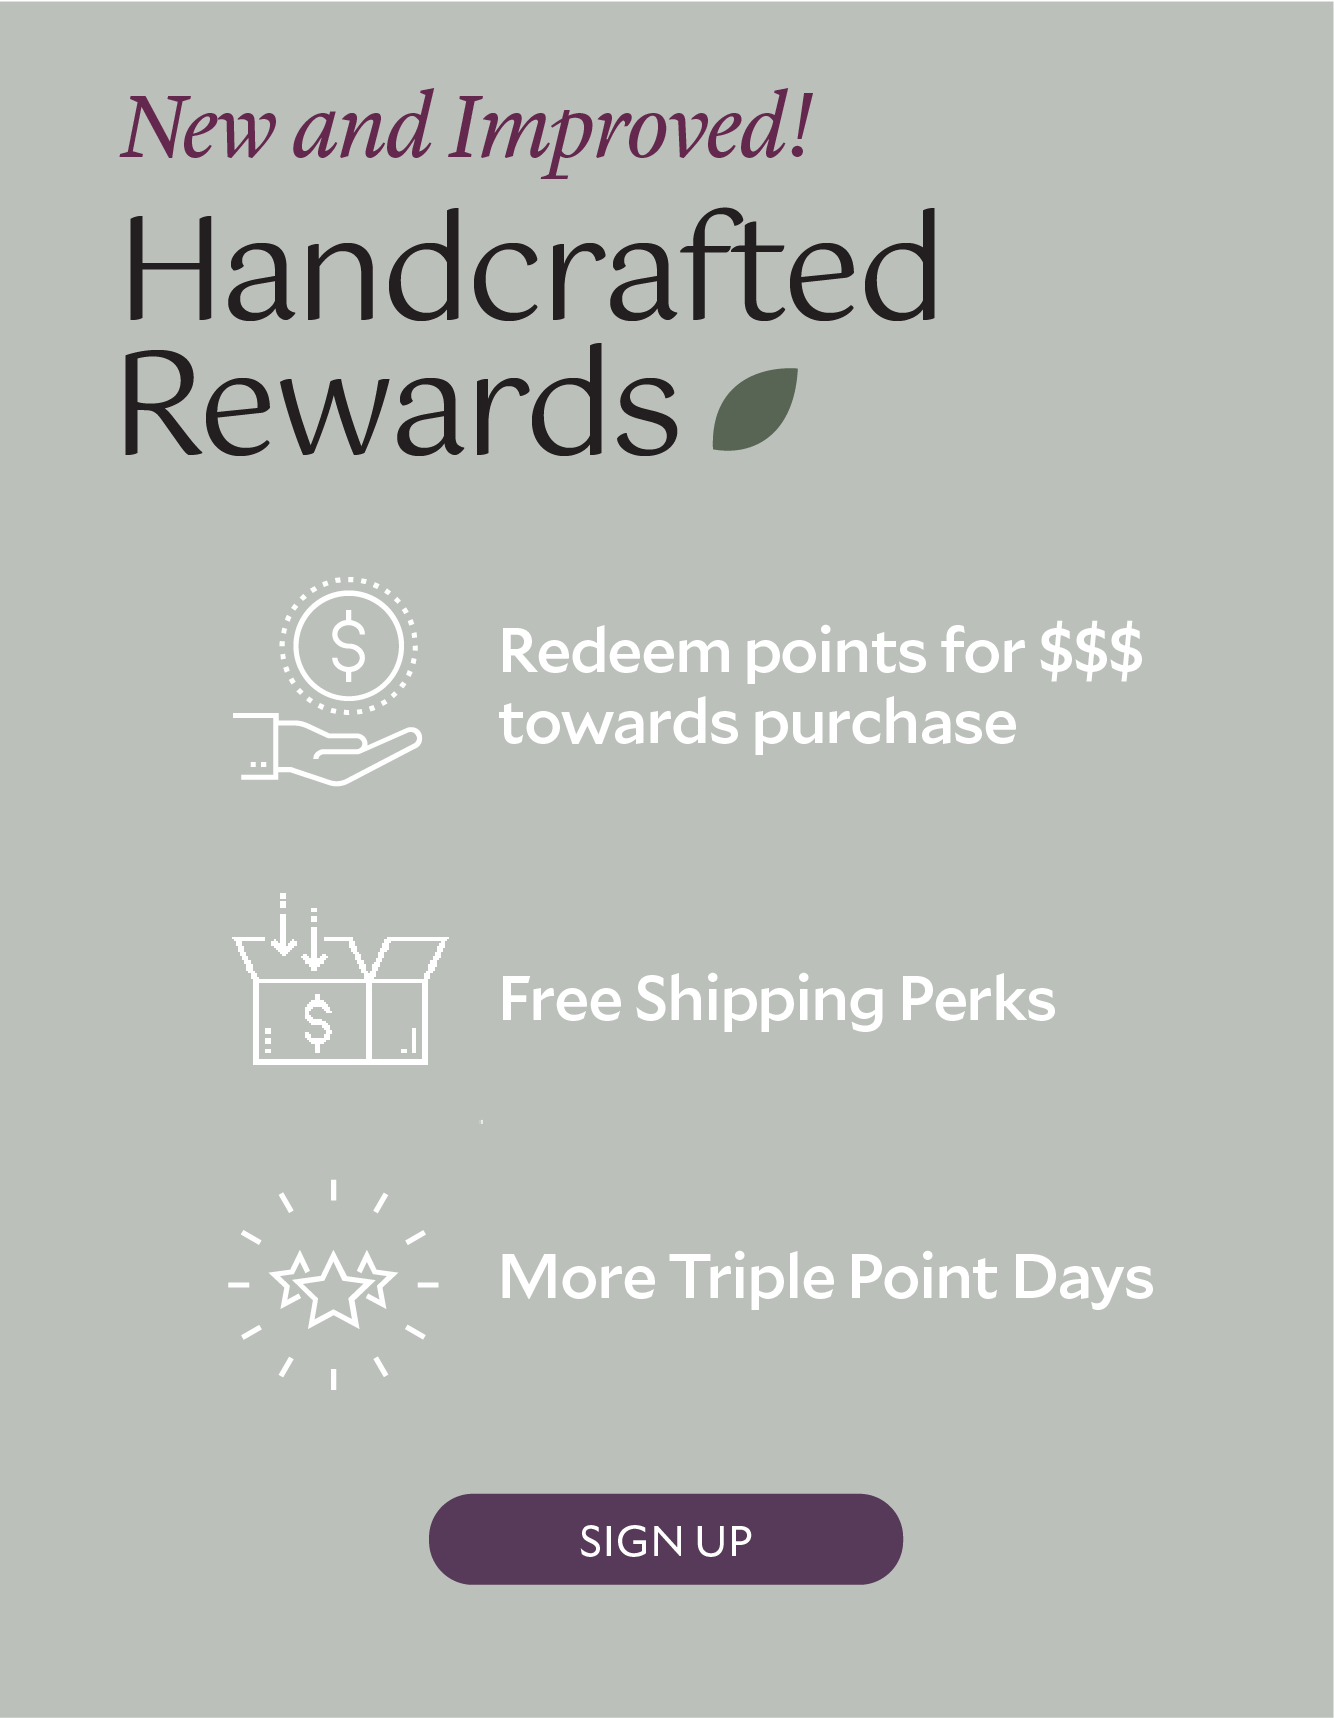 Sign in to start earning if you're a Handcrafted Rewards member!